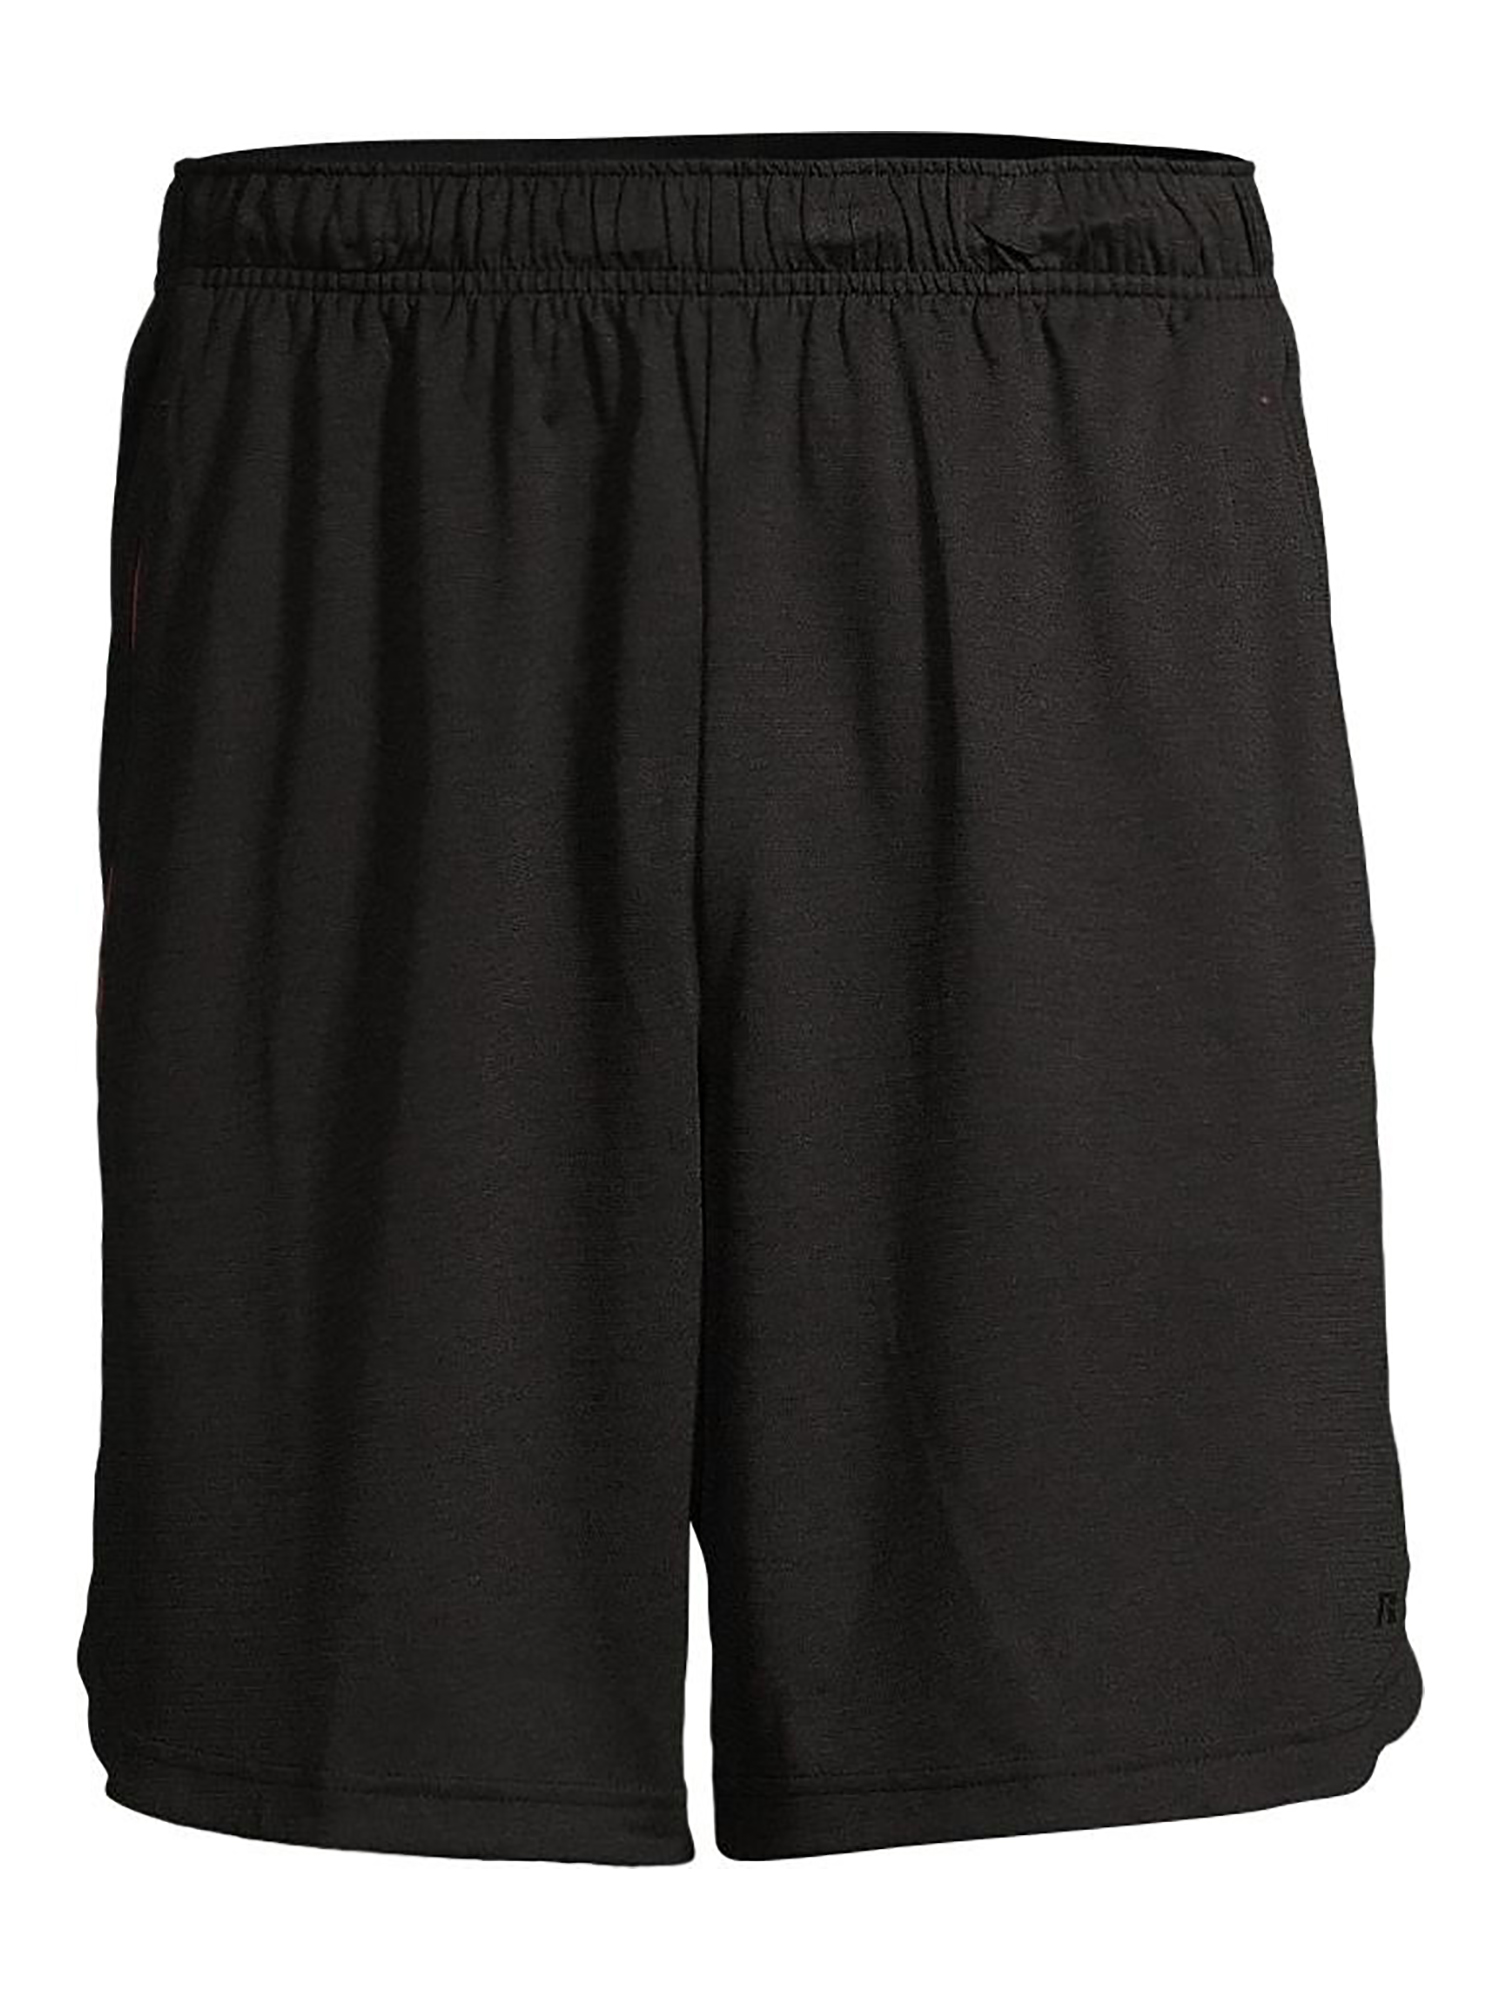 Russell Men's 9" Core Performance Active Shorts, up to Size 5XL - image 4 of 6